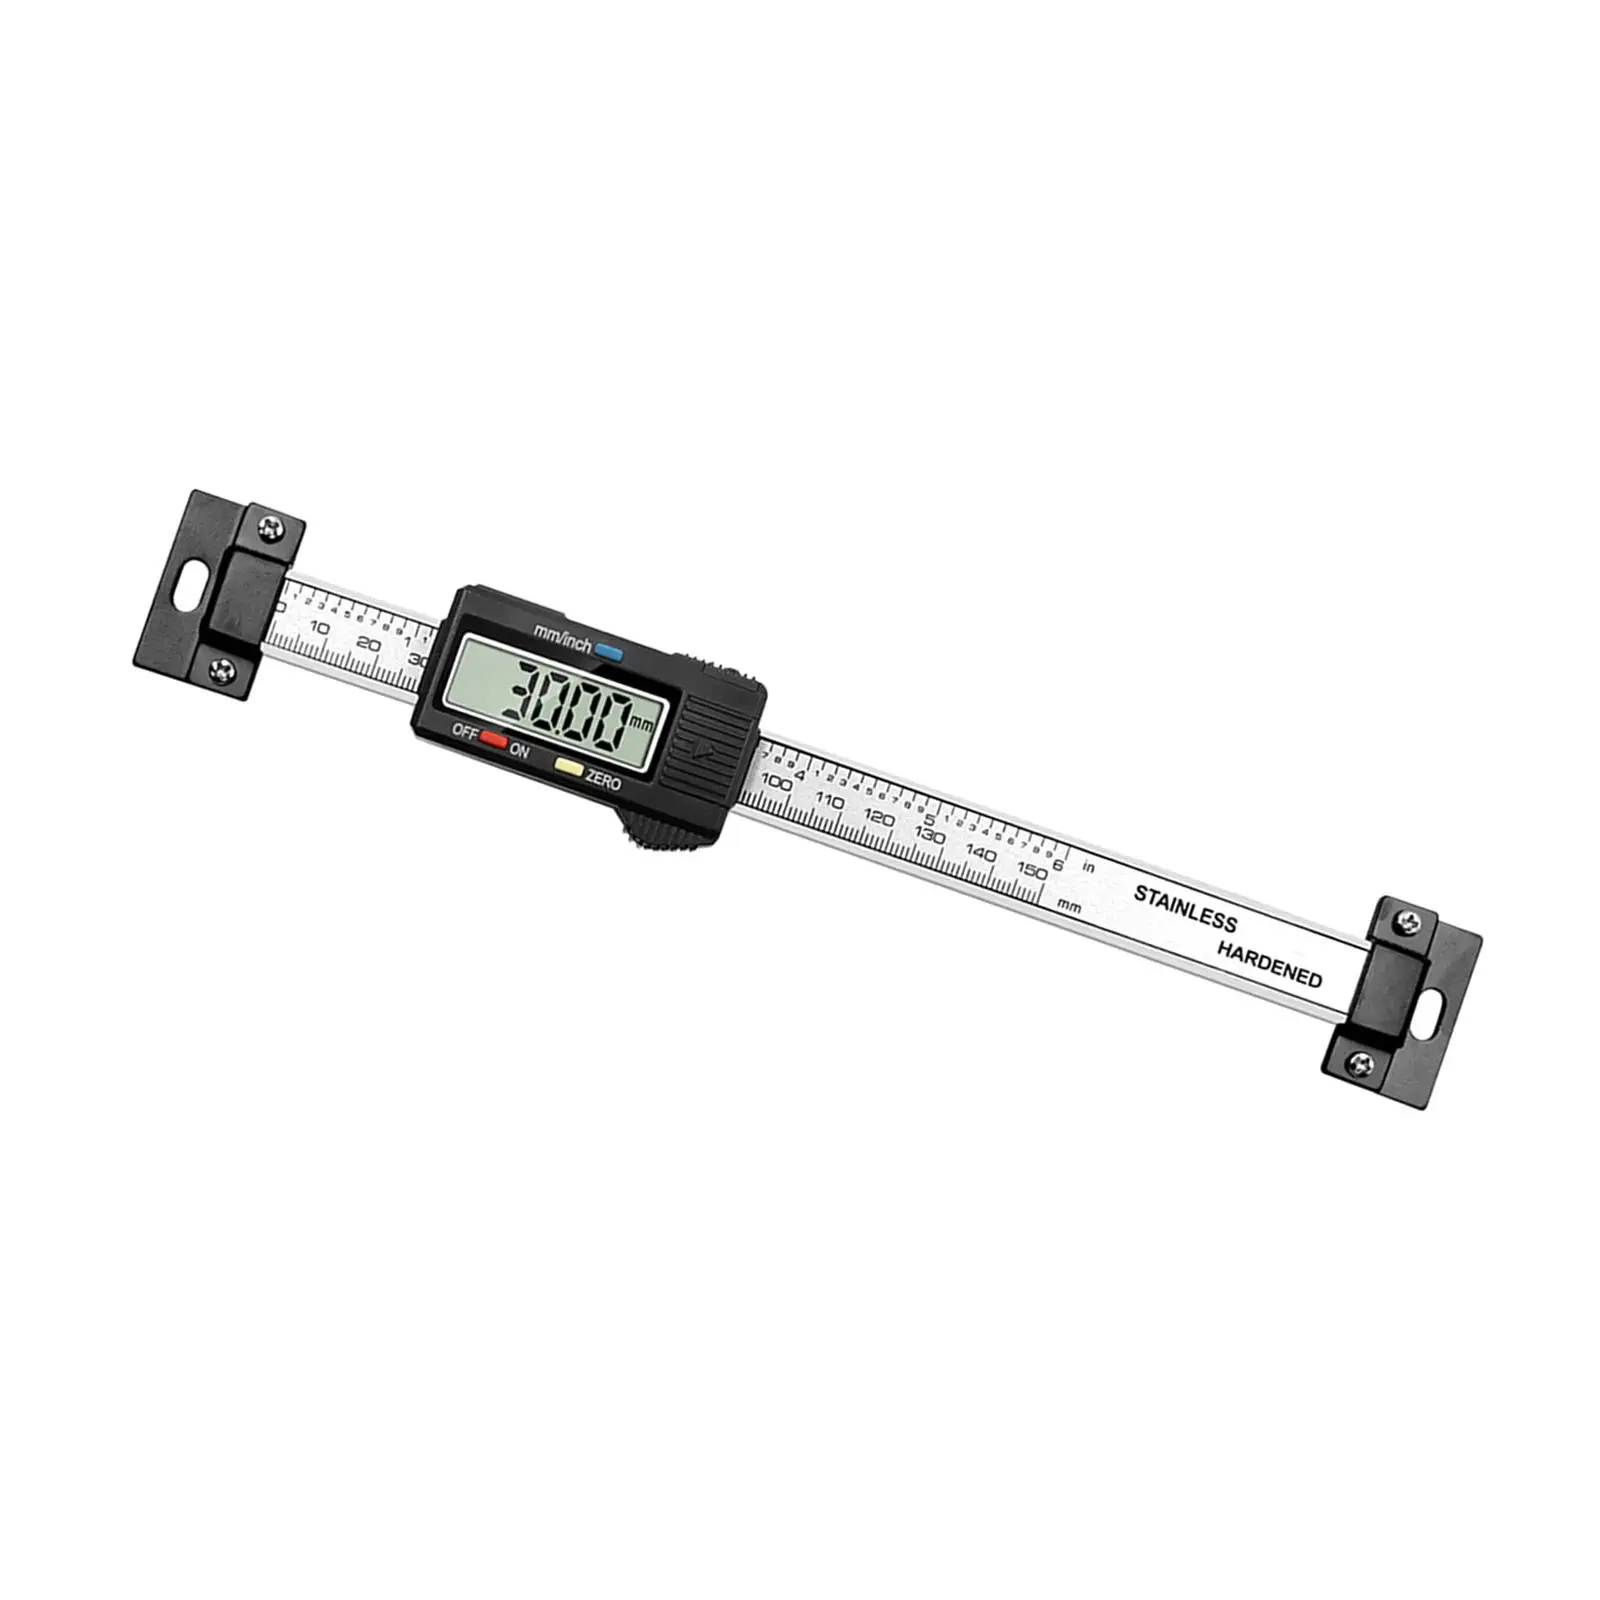 Horizontal Ruler Accurate Digital with LCD Display for Industrial Assembly